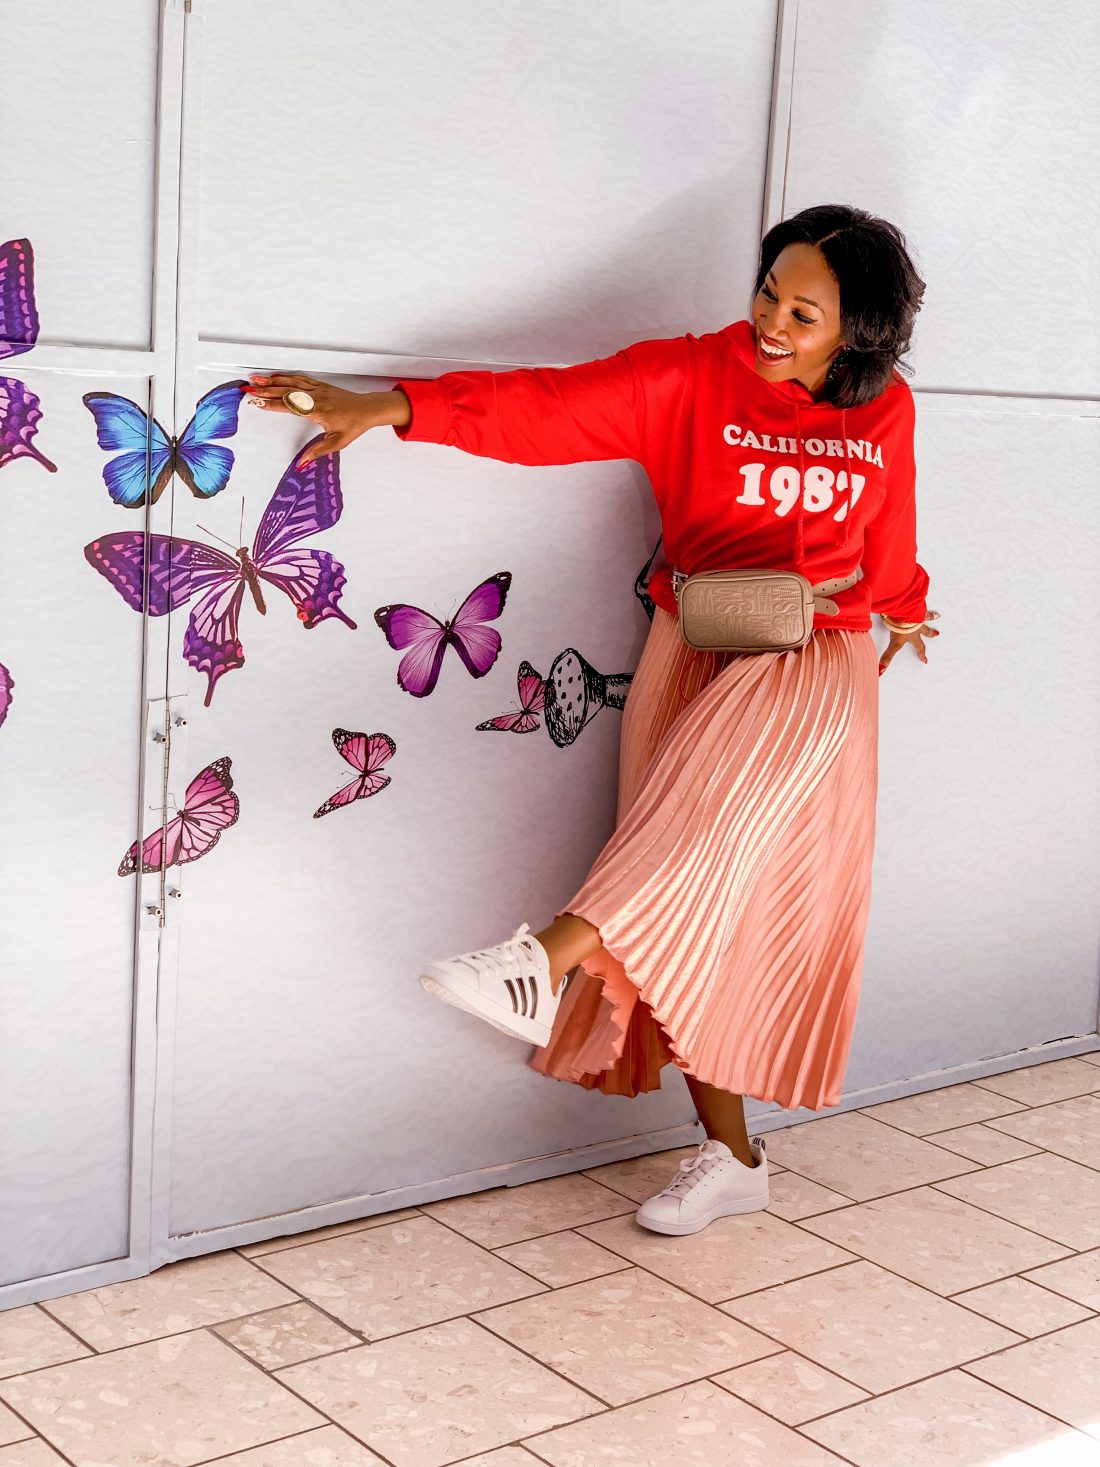 Shaunda Necole Thrive Global Contributing Writer: Ideas are the currency of life- let's be boundless butterflies!